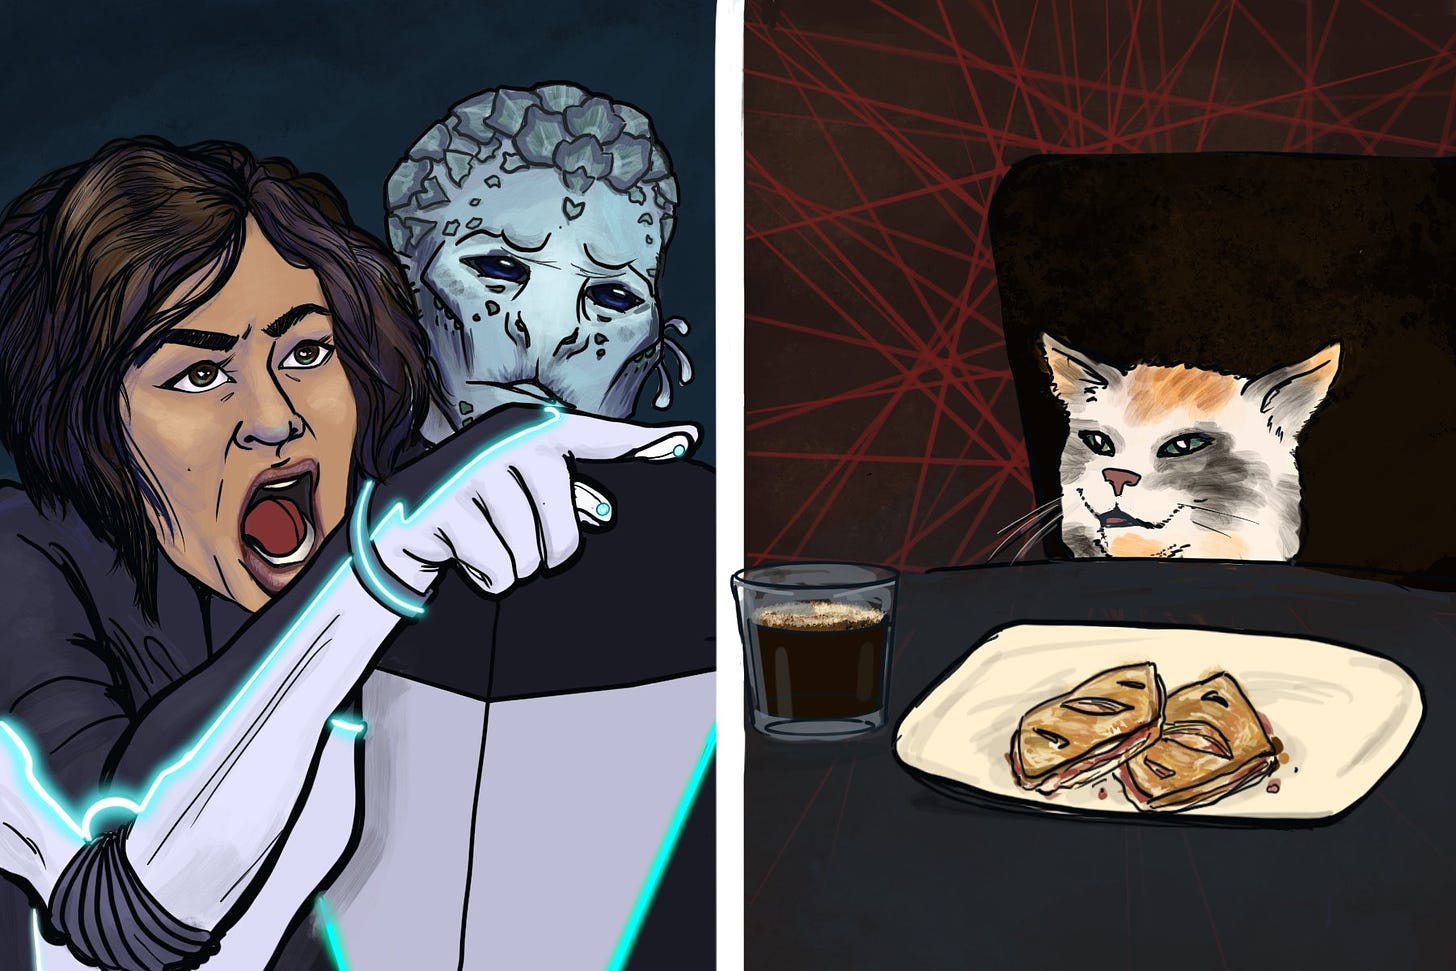 Meme of a woman yelling at a cat seated at a table; the woman in this case is Eva, with Vakar standing next to her, and the cat has a plate of pastelitos and a cup of Cuban coffee